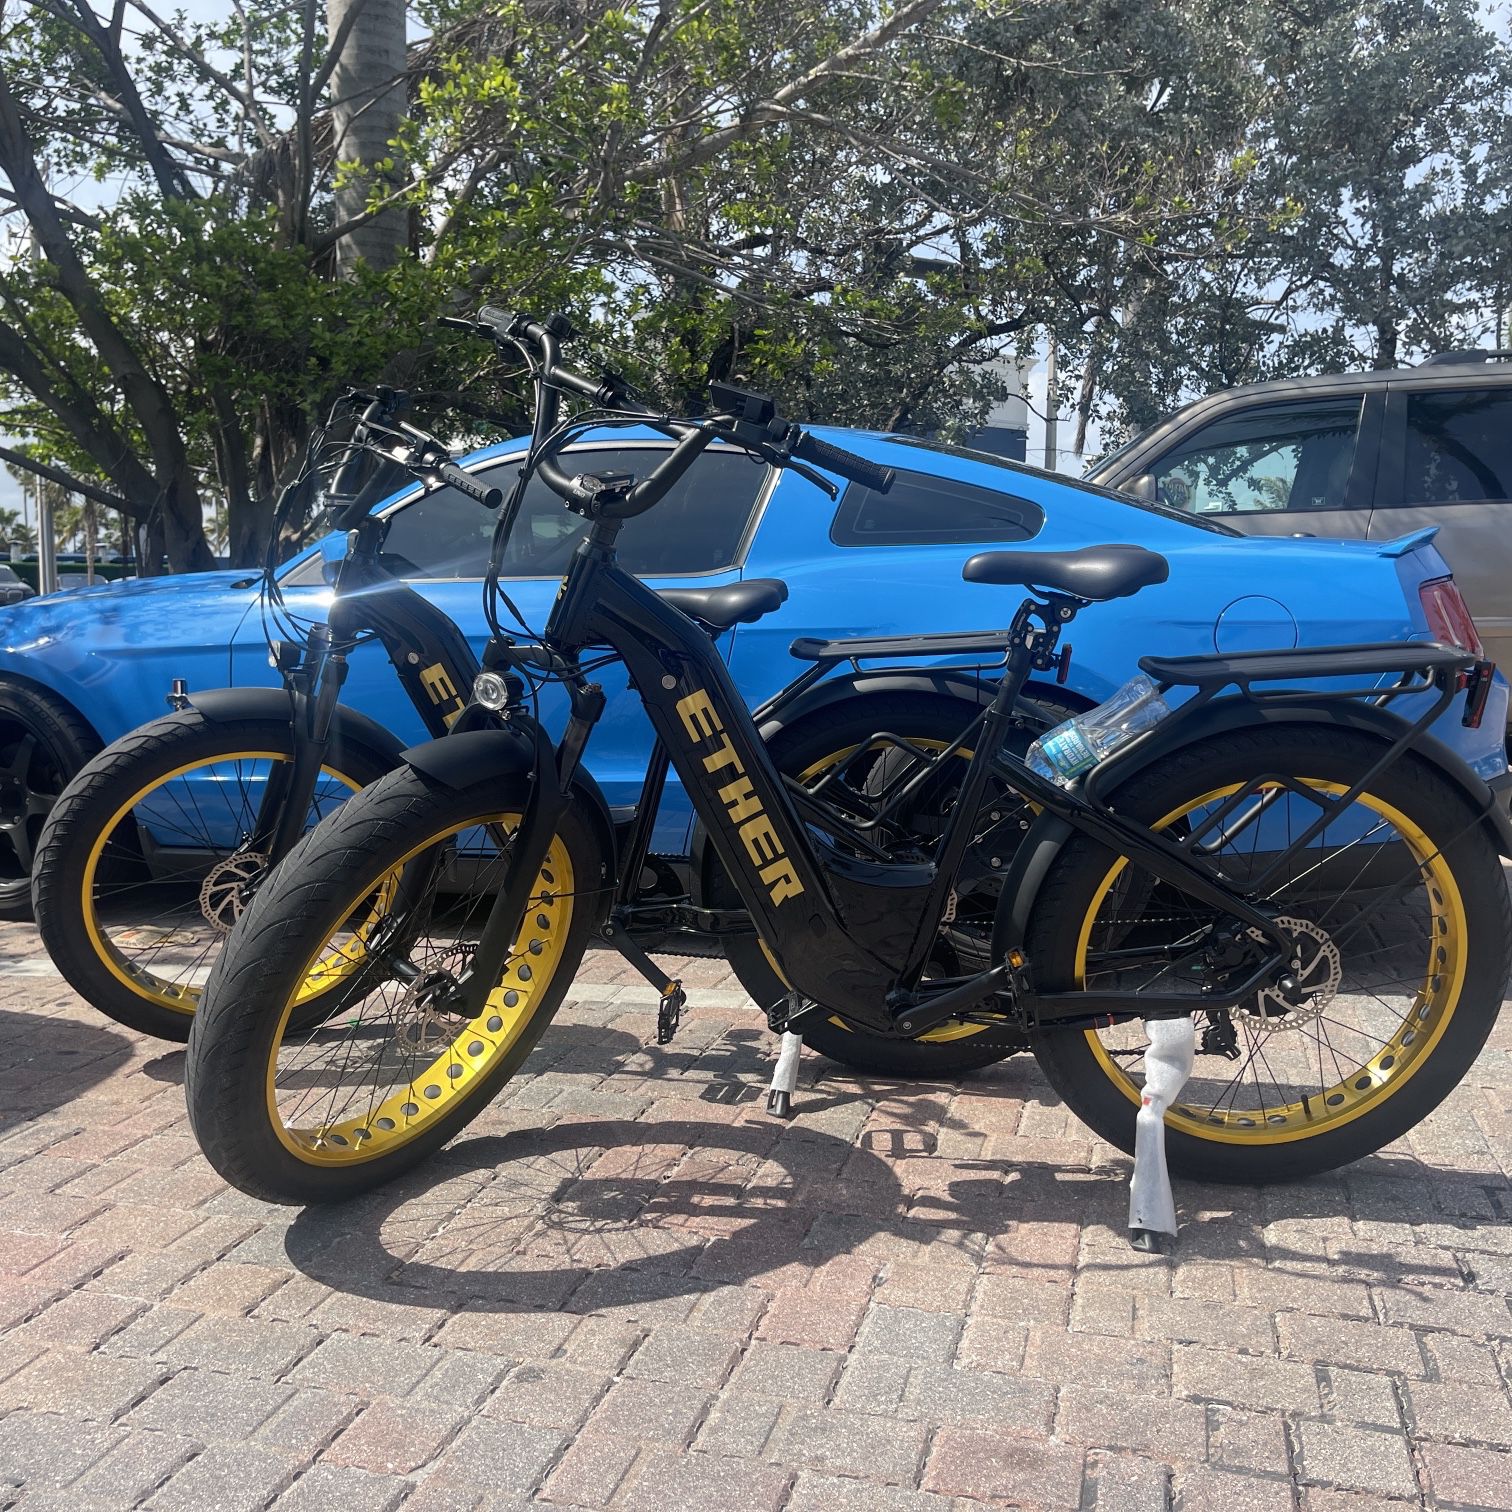  ELECTRIC FAT BIKES 1000watts   “ETHER” $2588 Each  Negotiable 